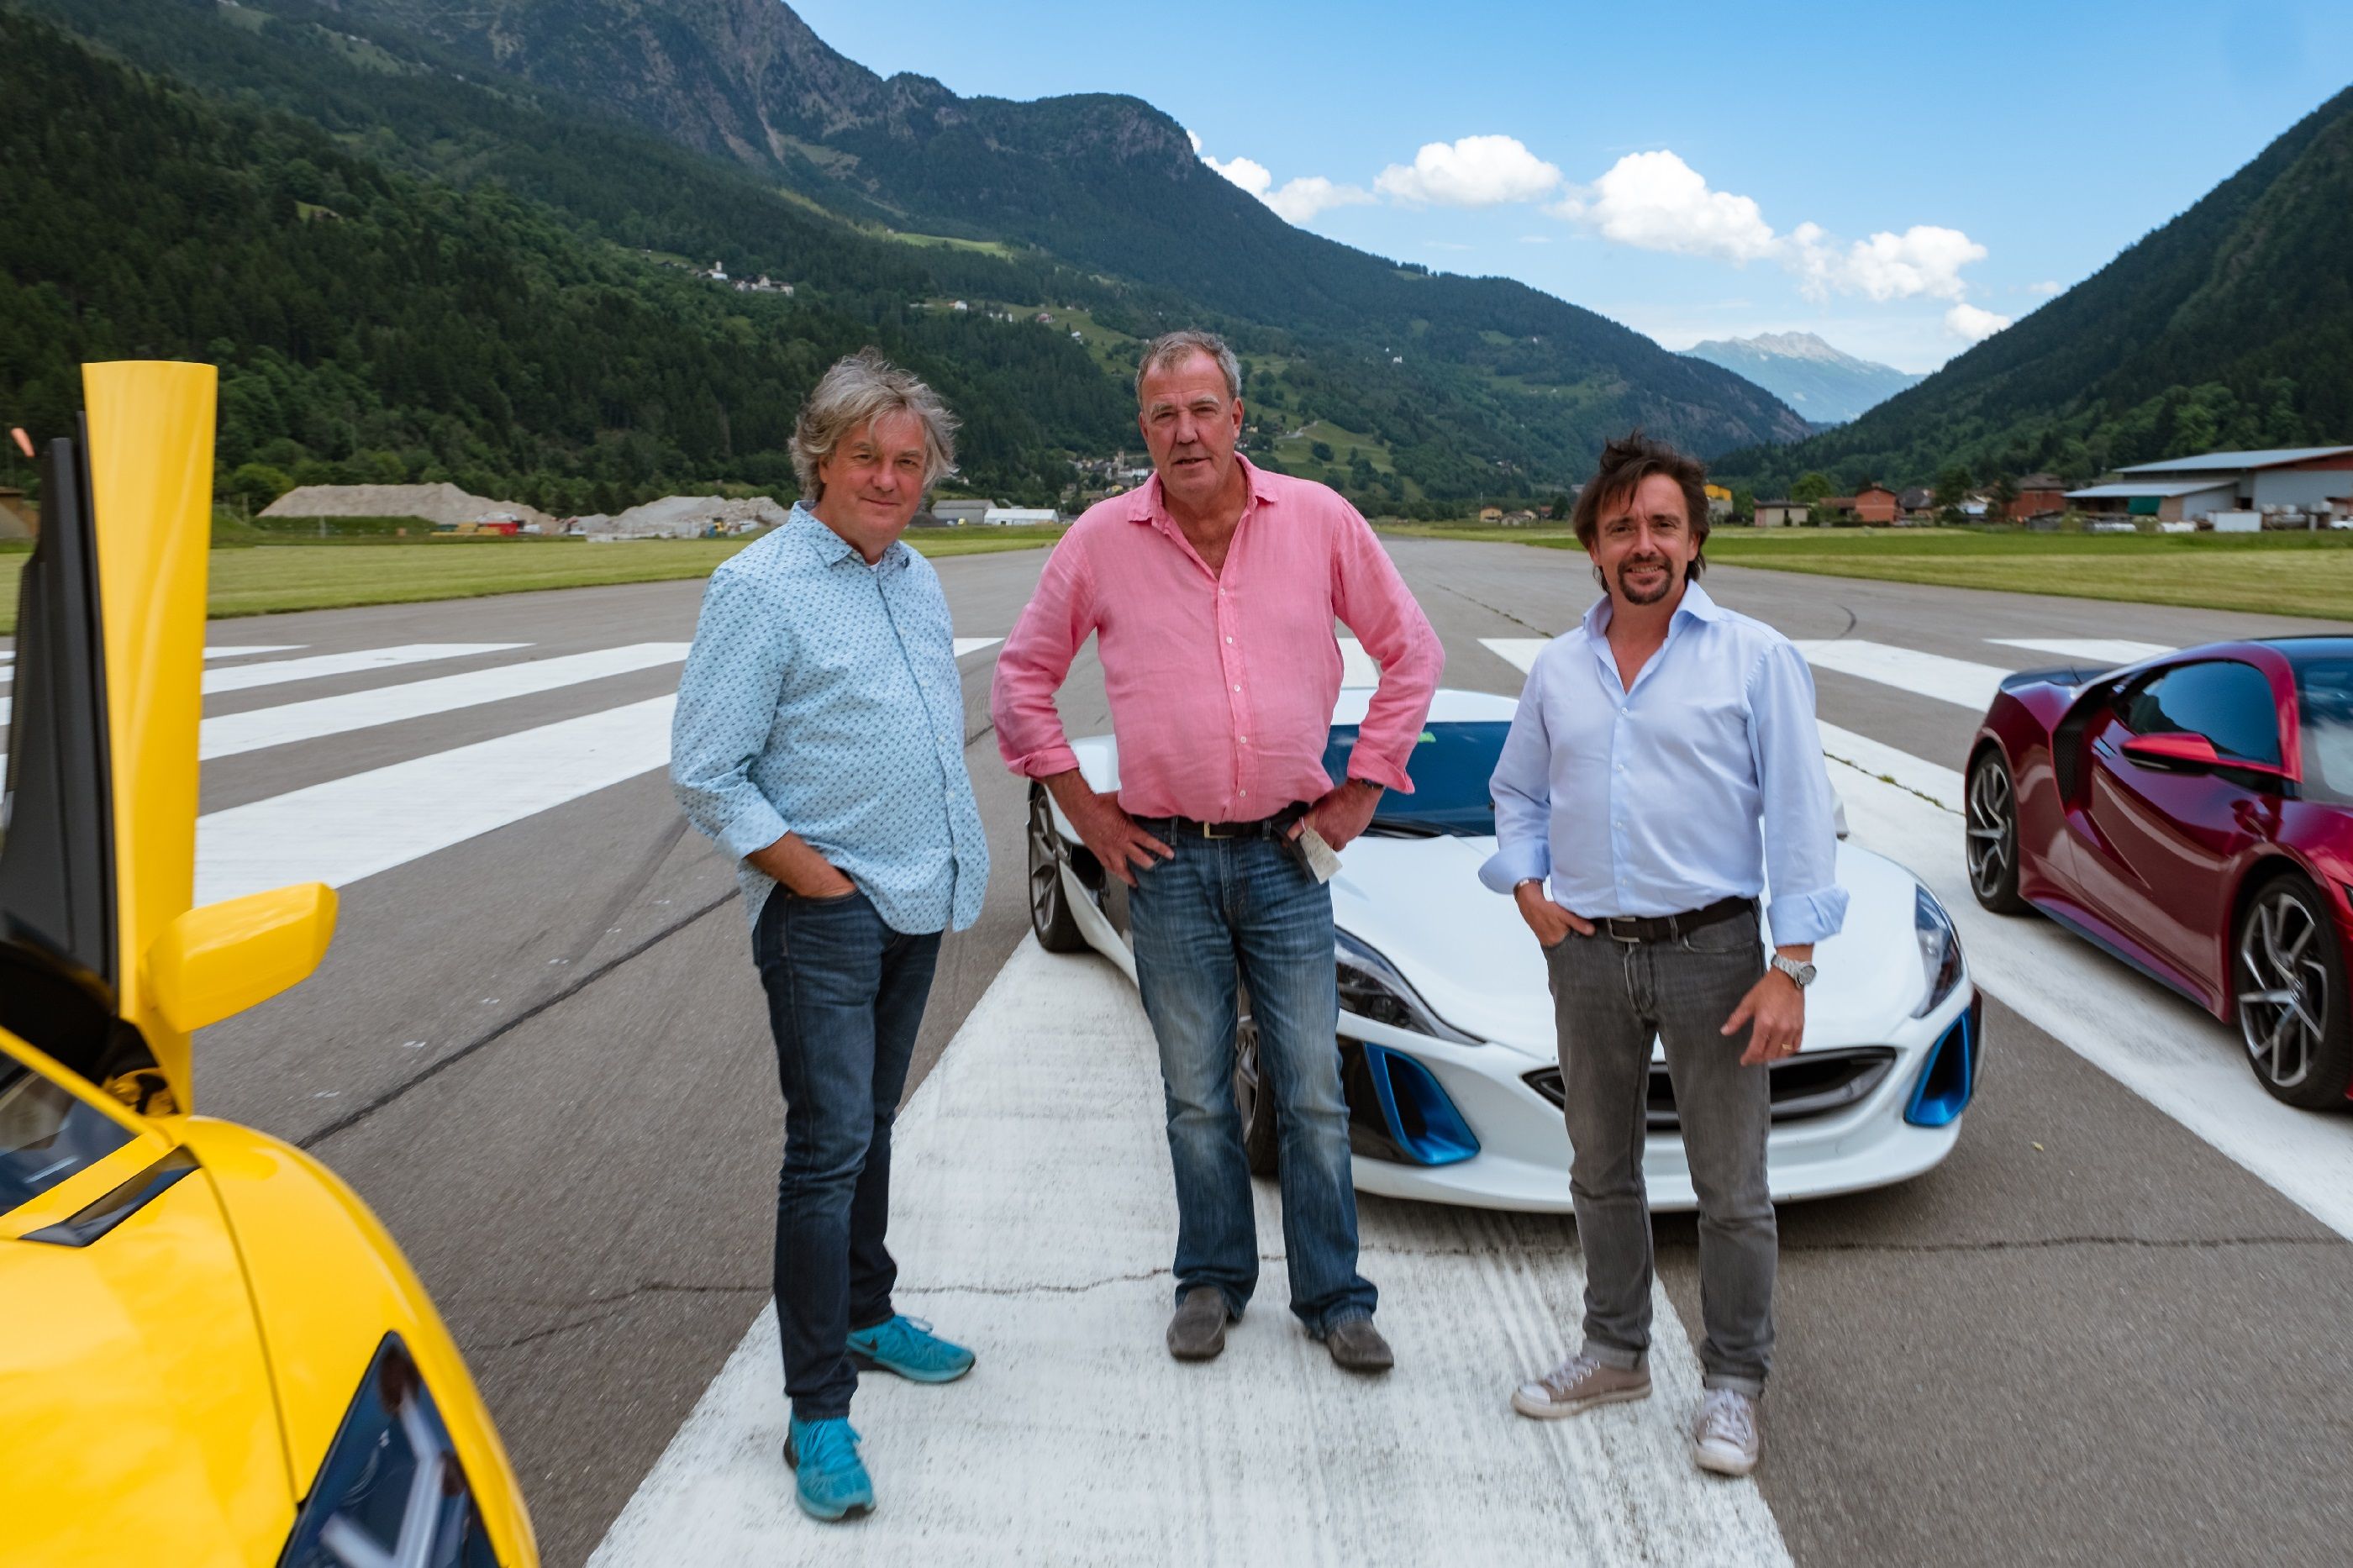 density maze Quadrant The Grand Tour game announced featuring Clarkson, Hammond, and May on  PlayStation 4 and XBox One